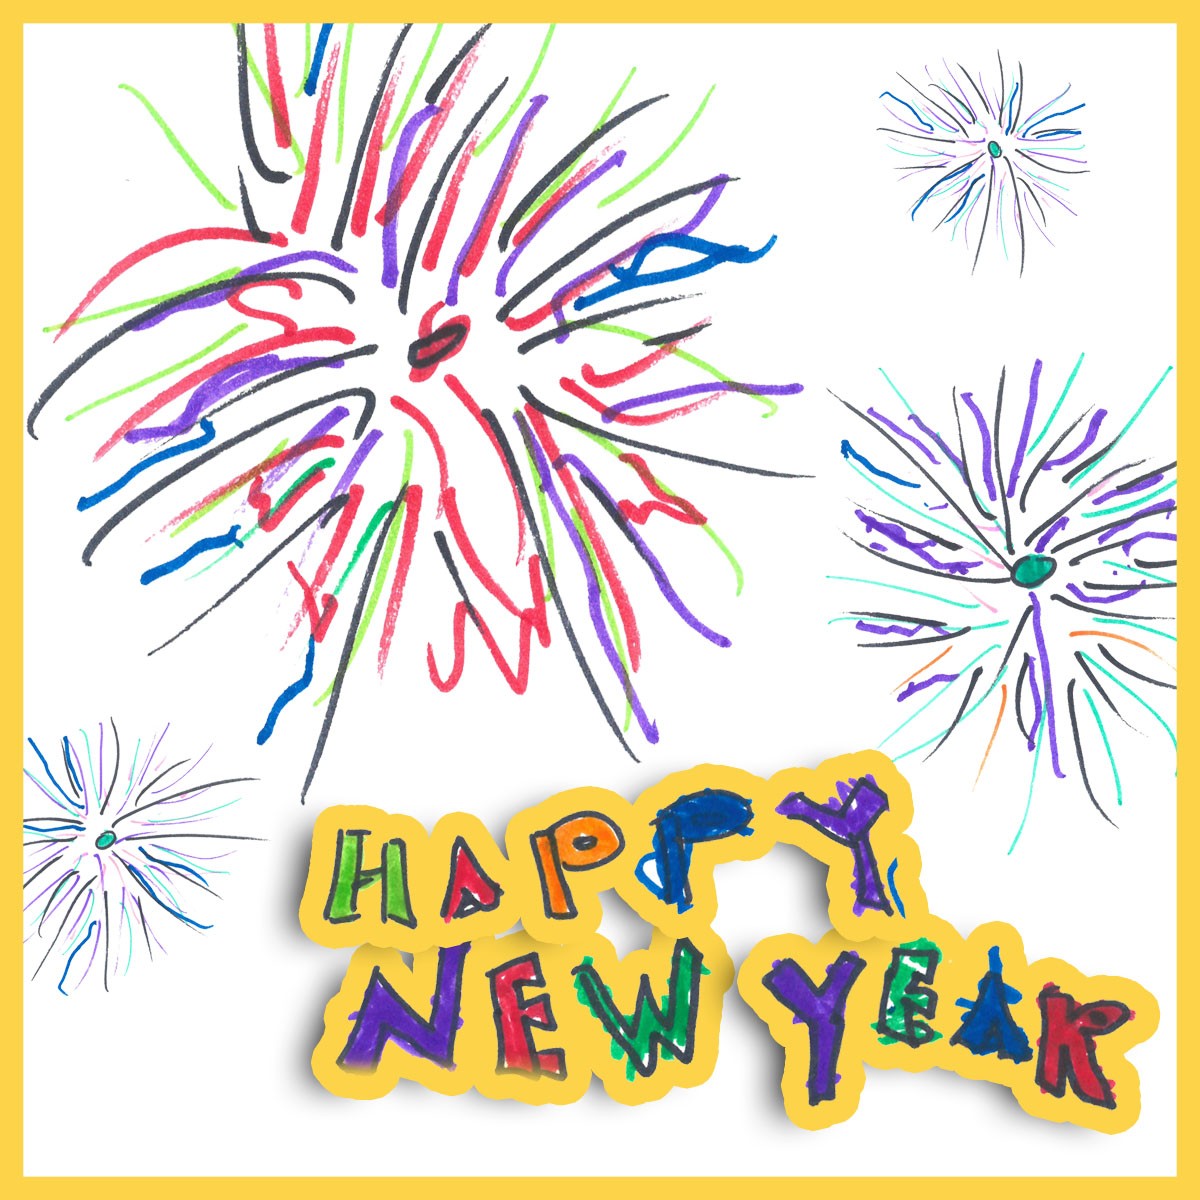 Happy New Year card artwork of fireworks inspired by St. Jude patients Cyra and Cheyenne.